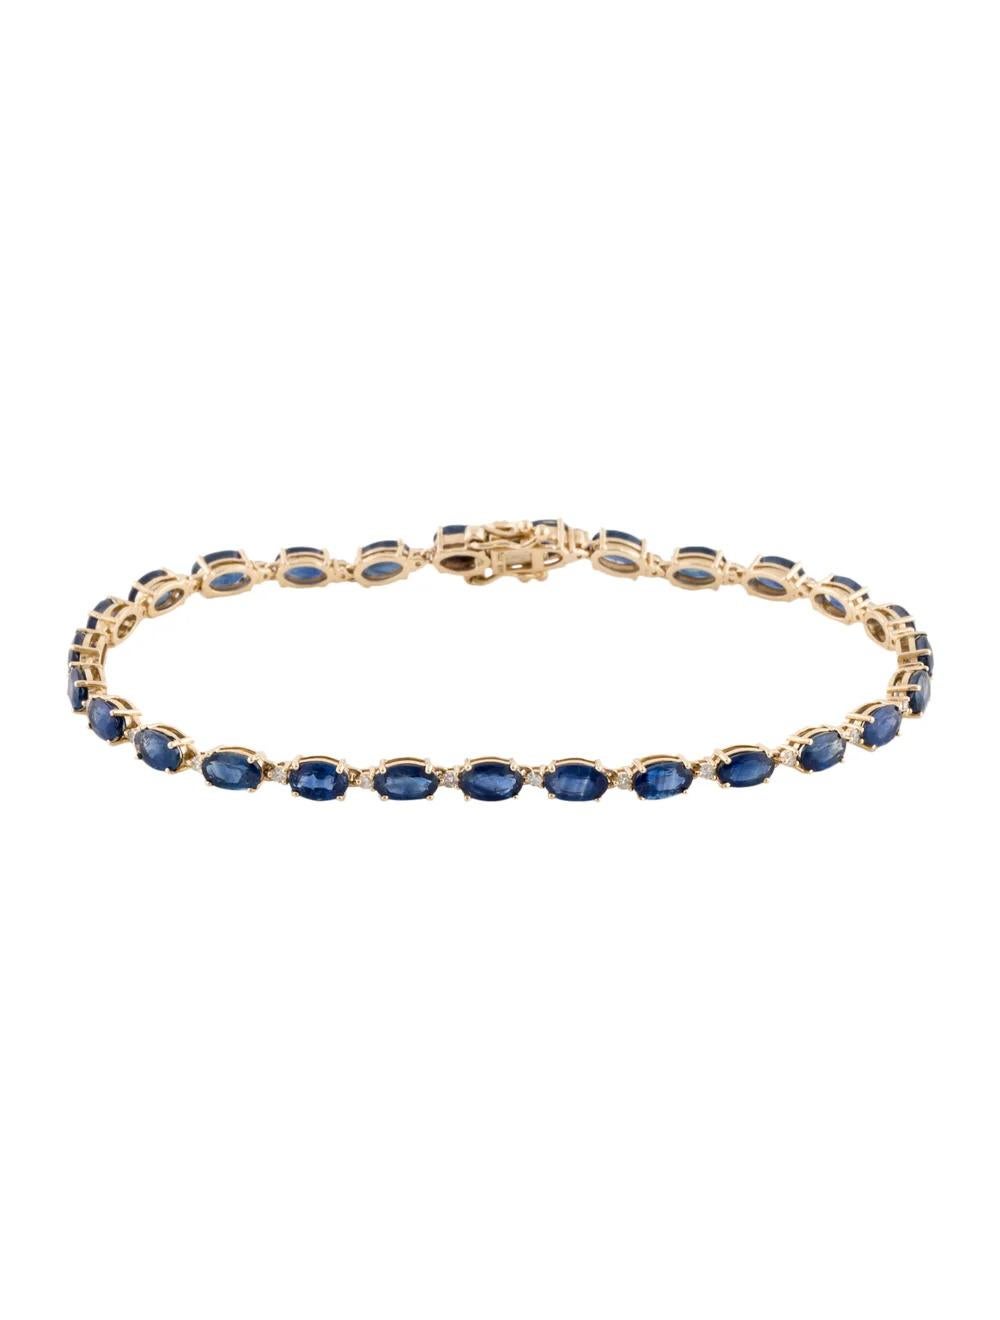 Presenting a radiant 14K Yellow Gold Bracelet adorned with a captivating 7.29 Carat Oval Modified Brilliant Sapphire, exuding elegance and sophistication.

Specifications:

* Metal Type: 14K Yellow Gold
* Gemstone:
* Sapphire
* Carat Weight: 7.29
*